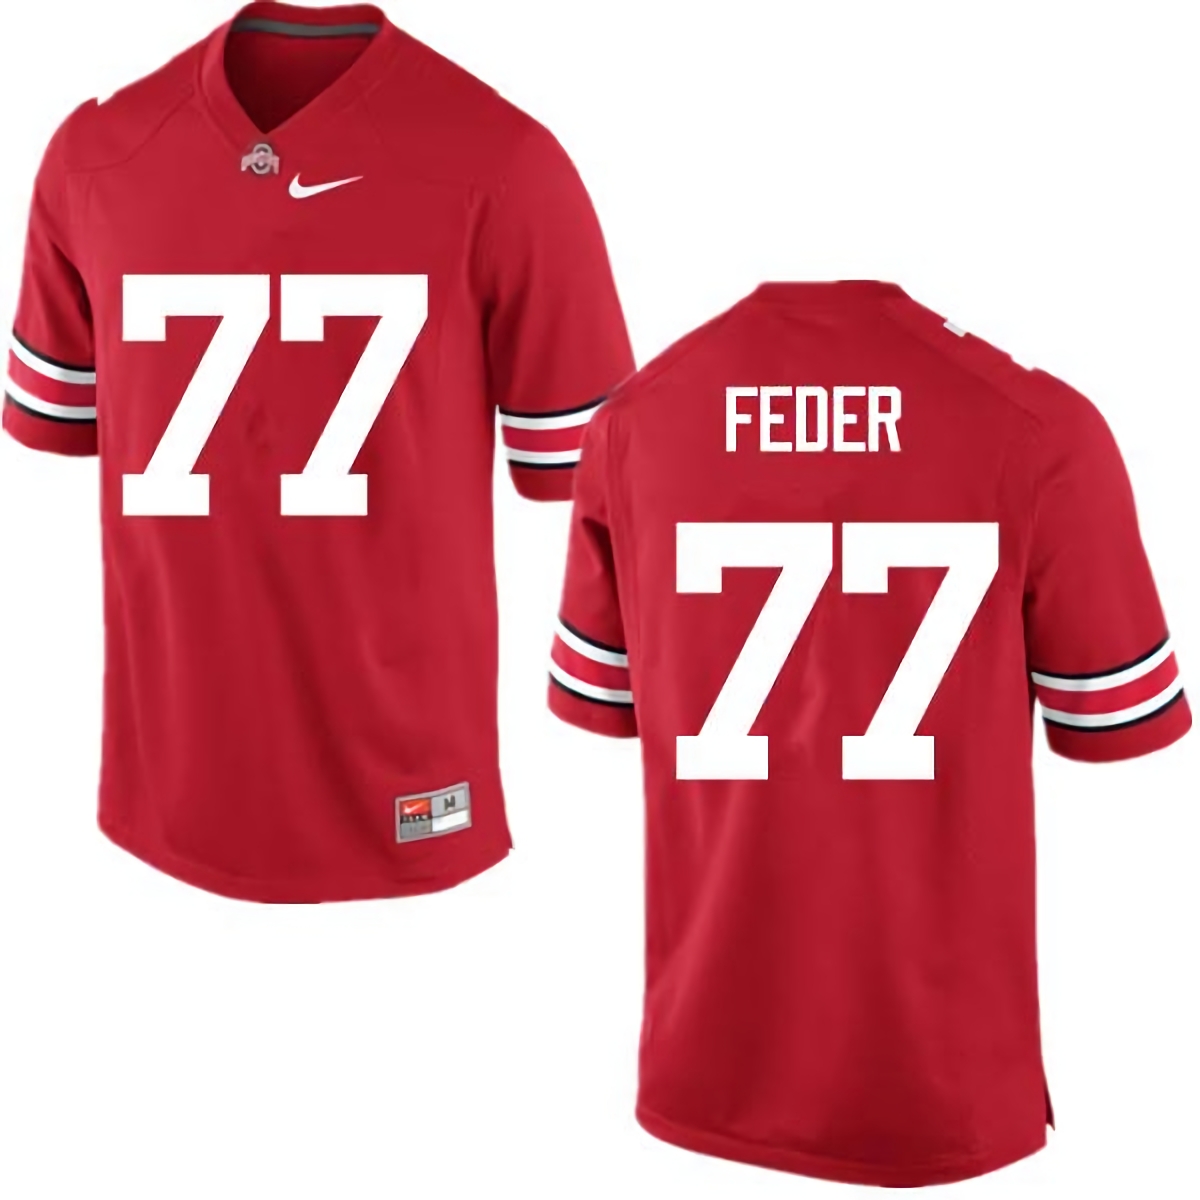 Kevin Feder Ohio State Buckeyes Men's NCAA #77 Nike Red College Stitched Football Jersey RJW0056PU